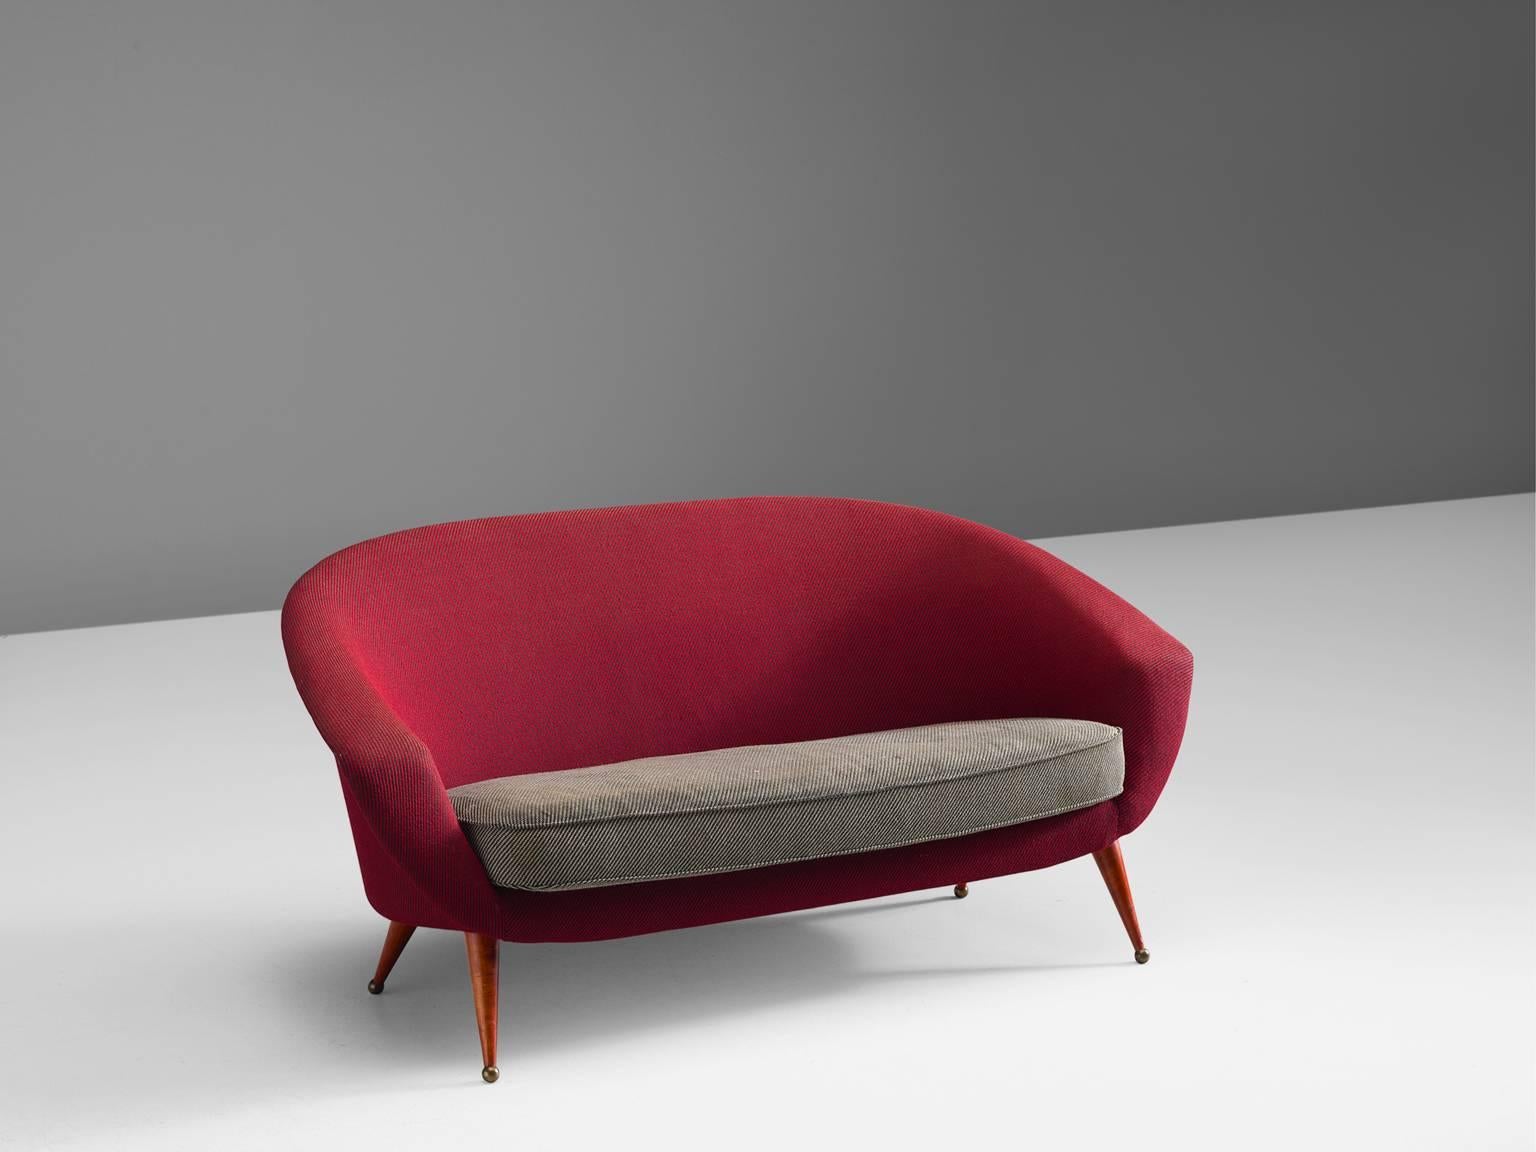 Loveseat 'Tellus', in red and grey fabric, wood and brass, by Folke Jansson, for S.M. Wincrantz, Sweden, 1956.

Elegant settee by Swedish designer Folke Jansson. This design shows elegant lines. Starting with the four stained wooden legs. They are